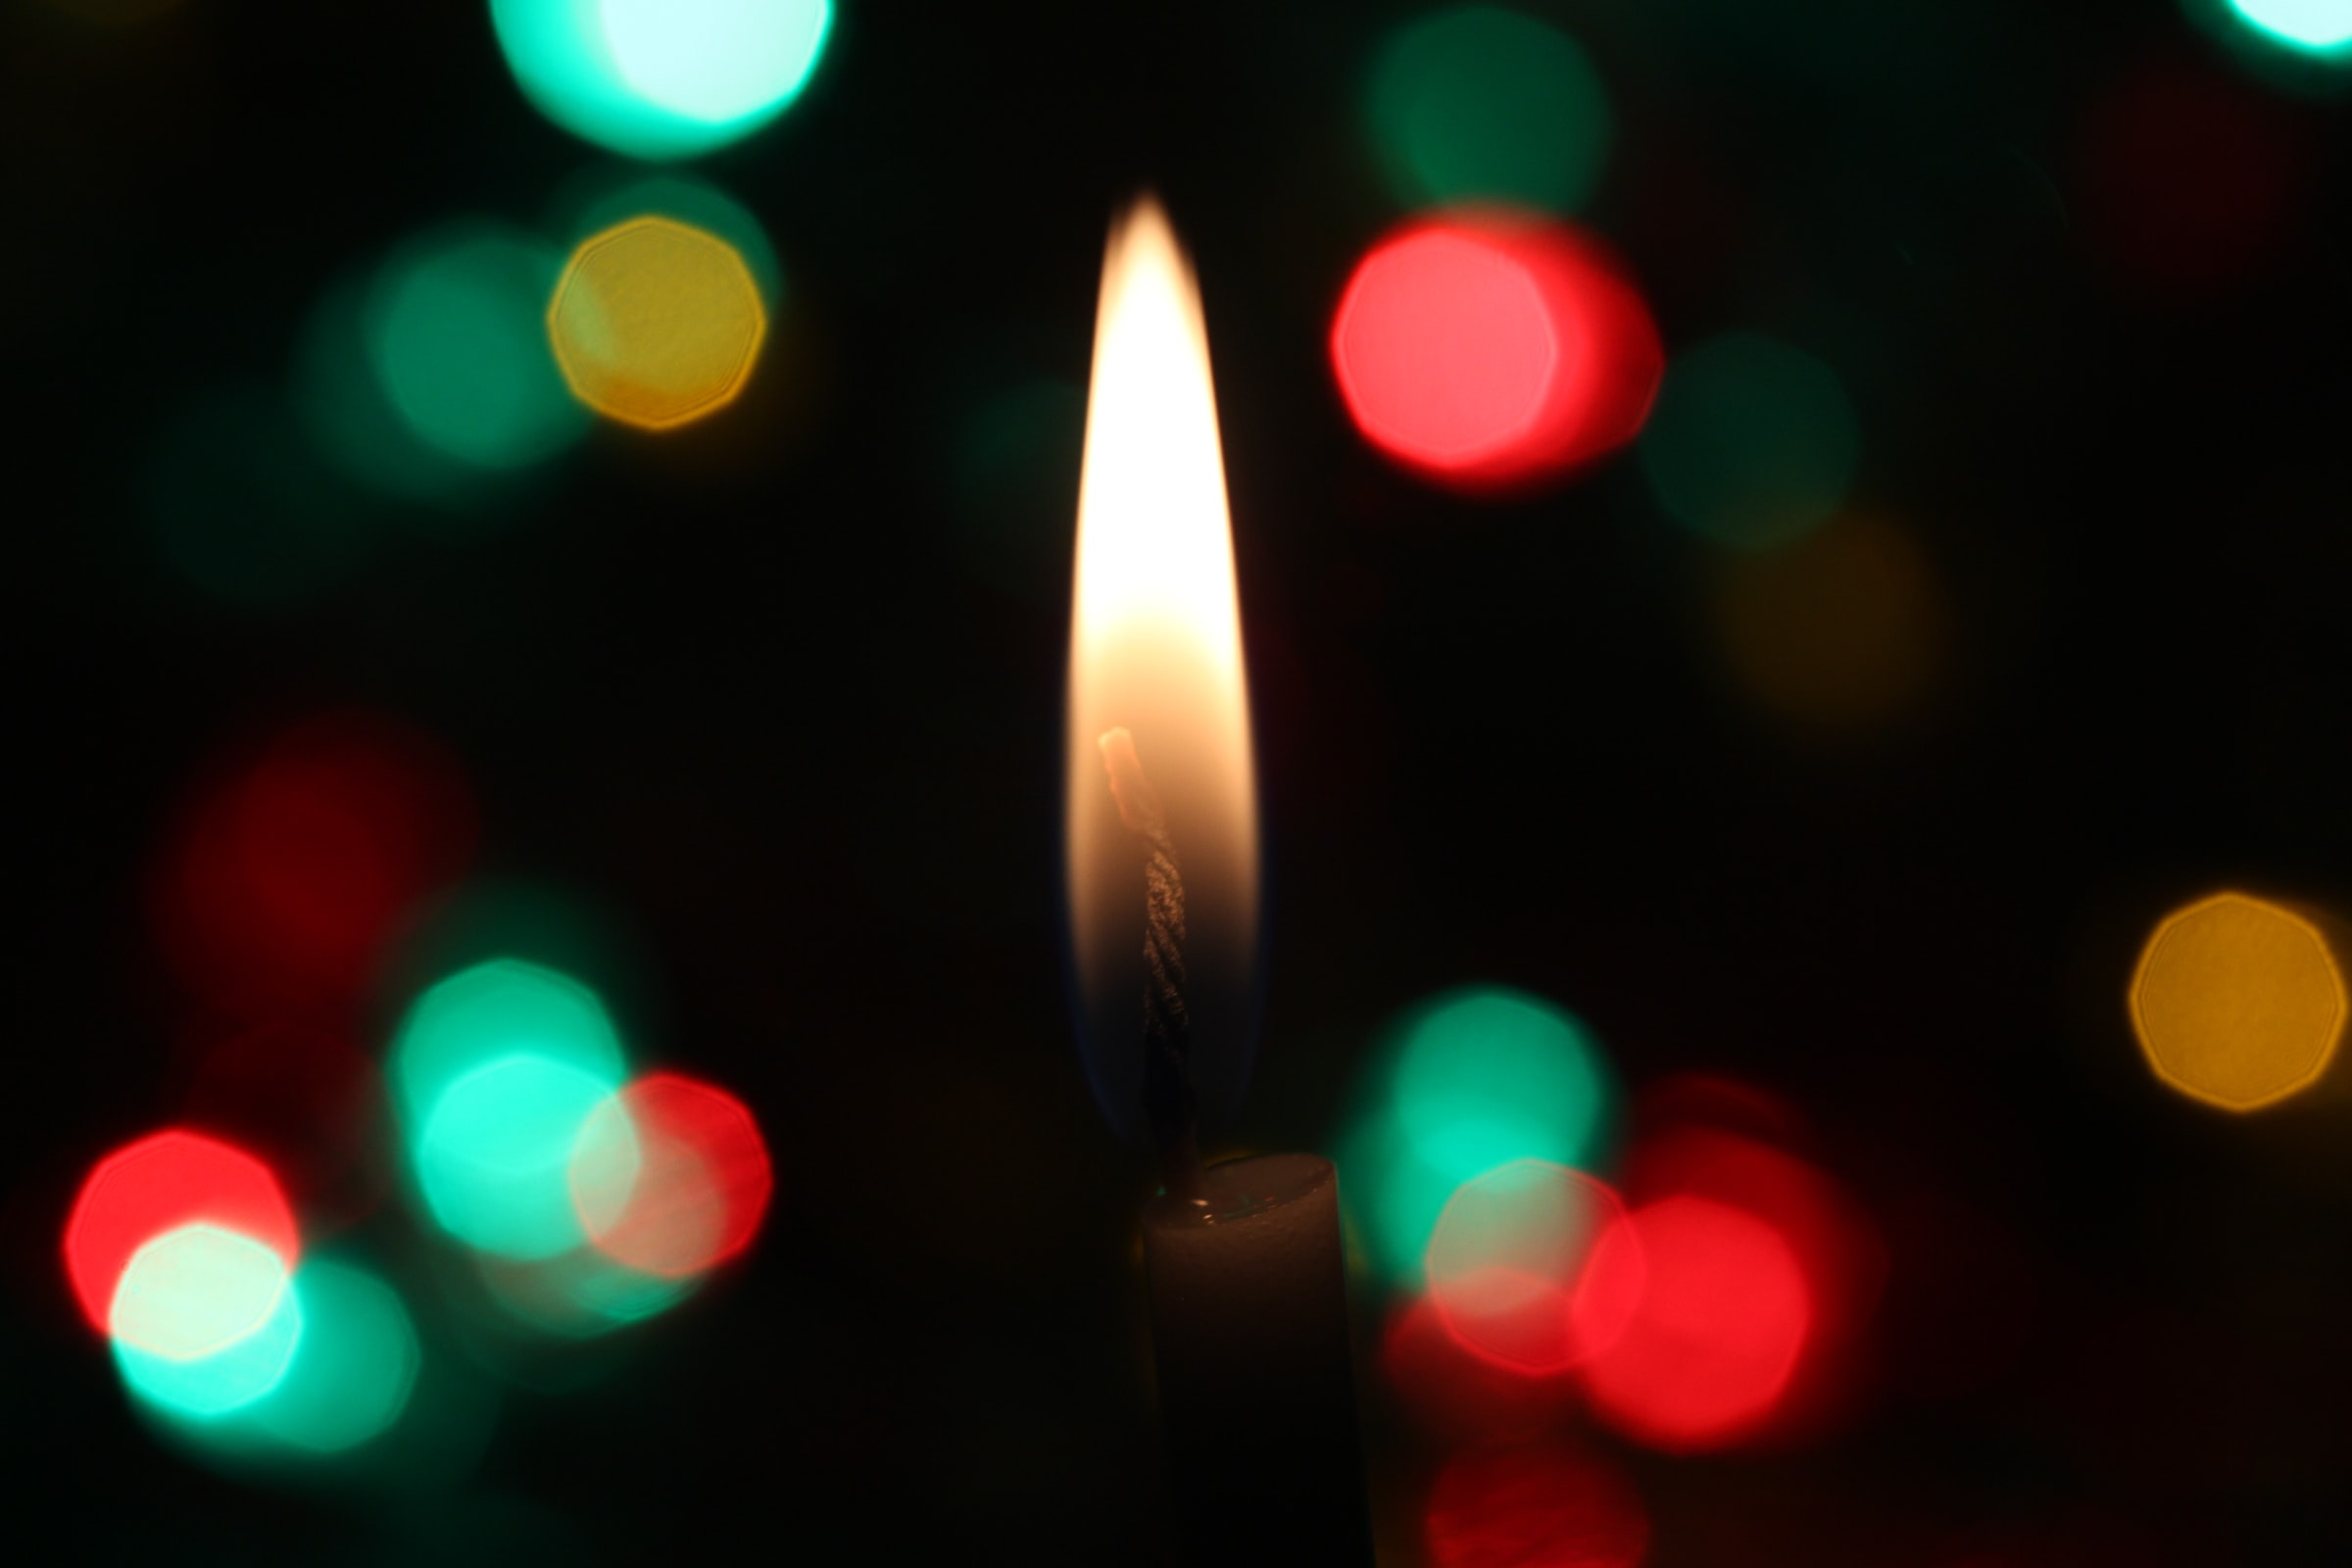 A close-up of a candle flame reflected in glass